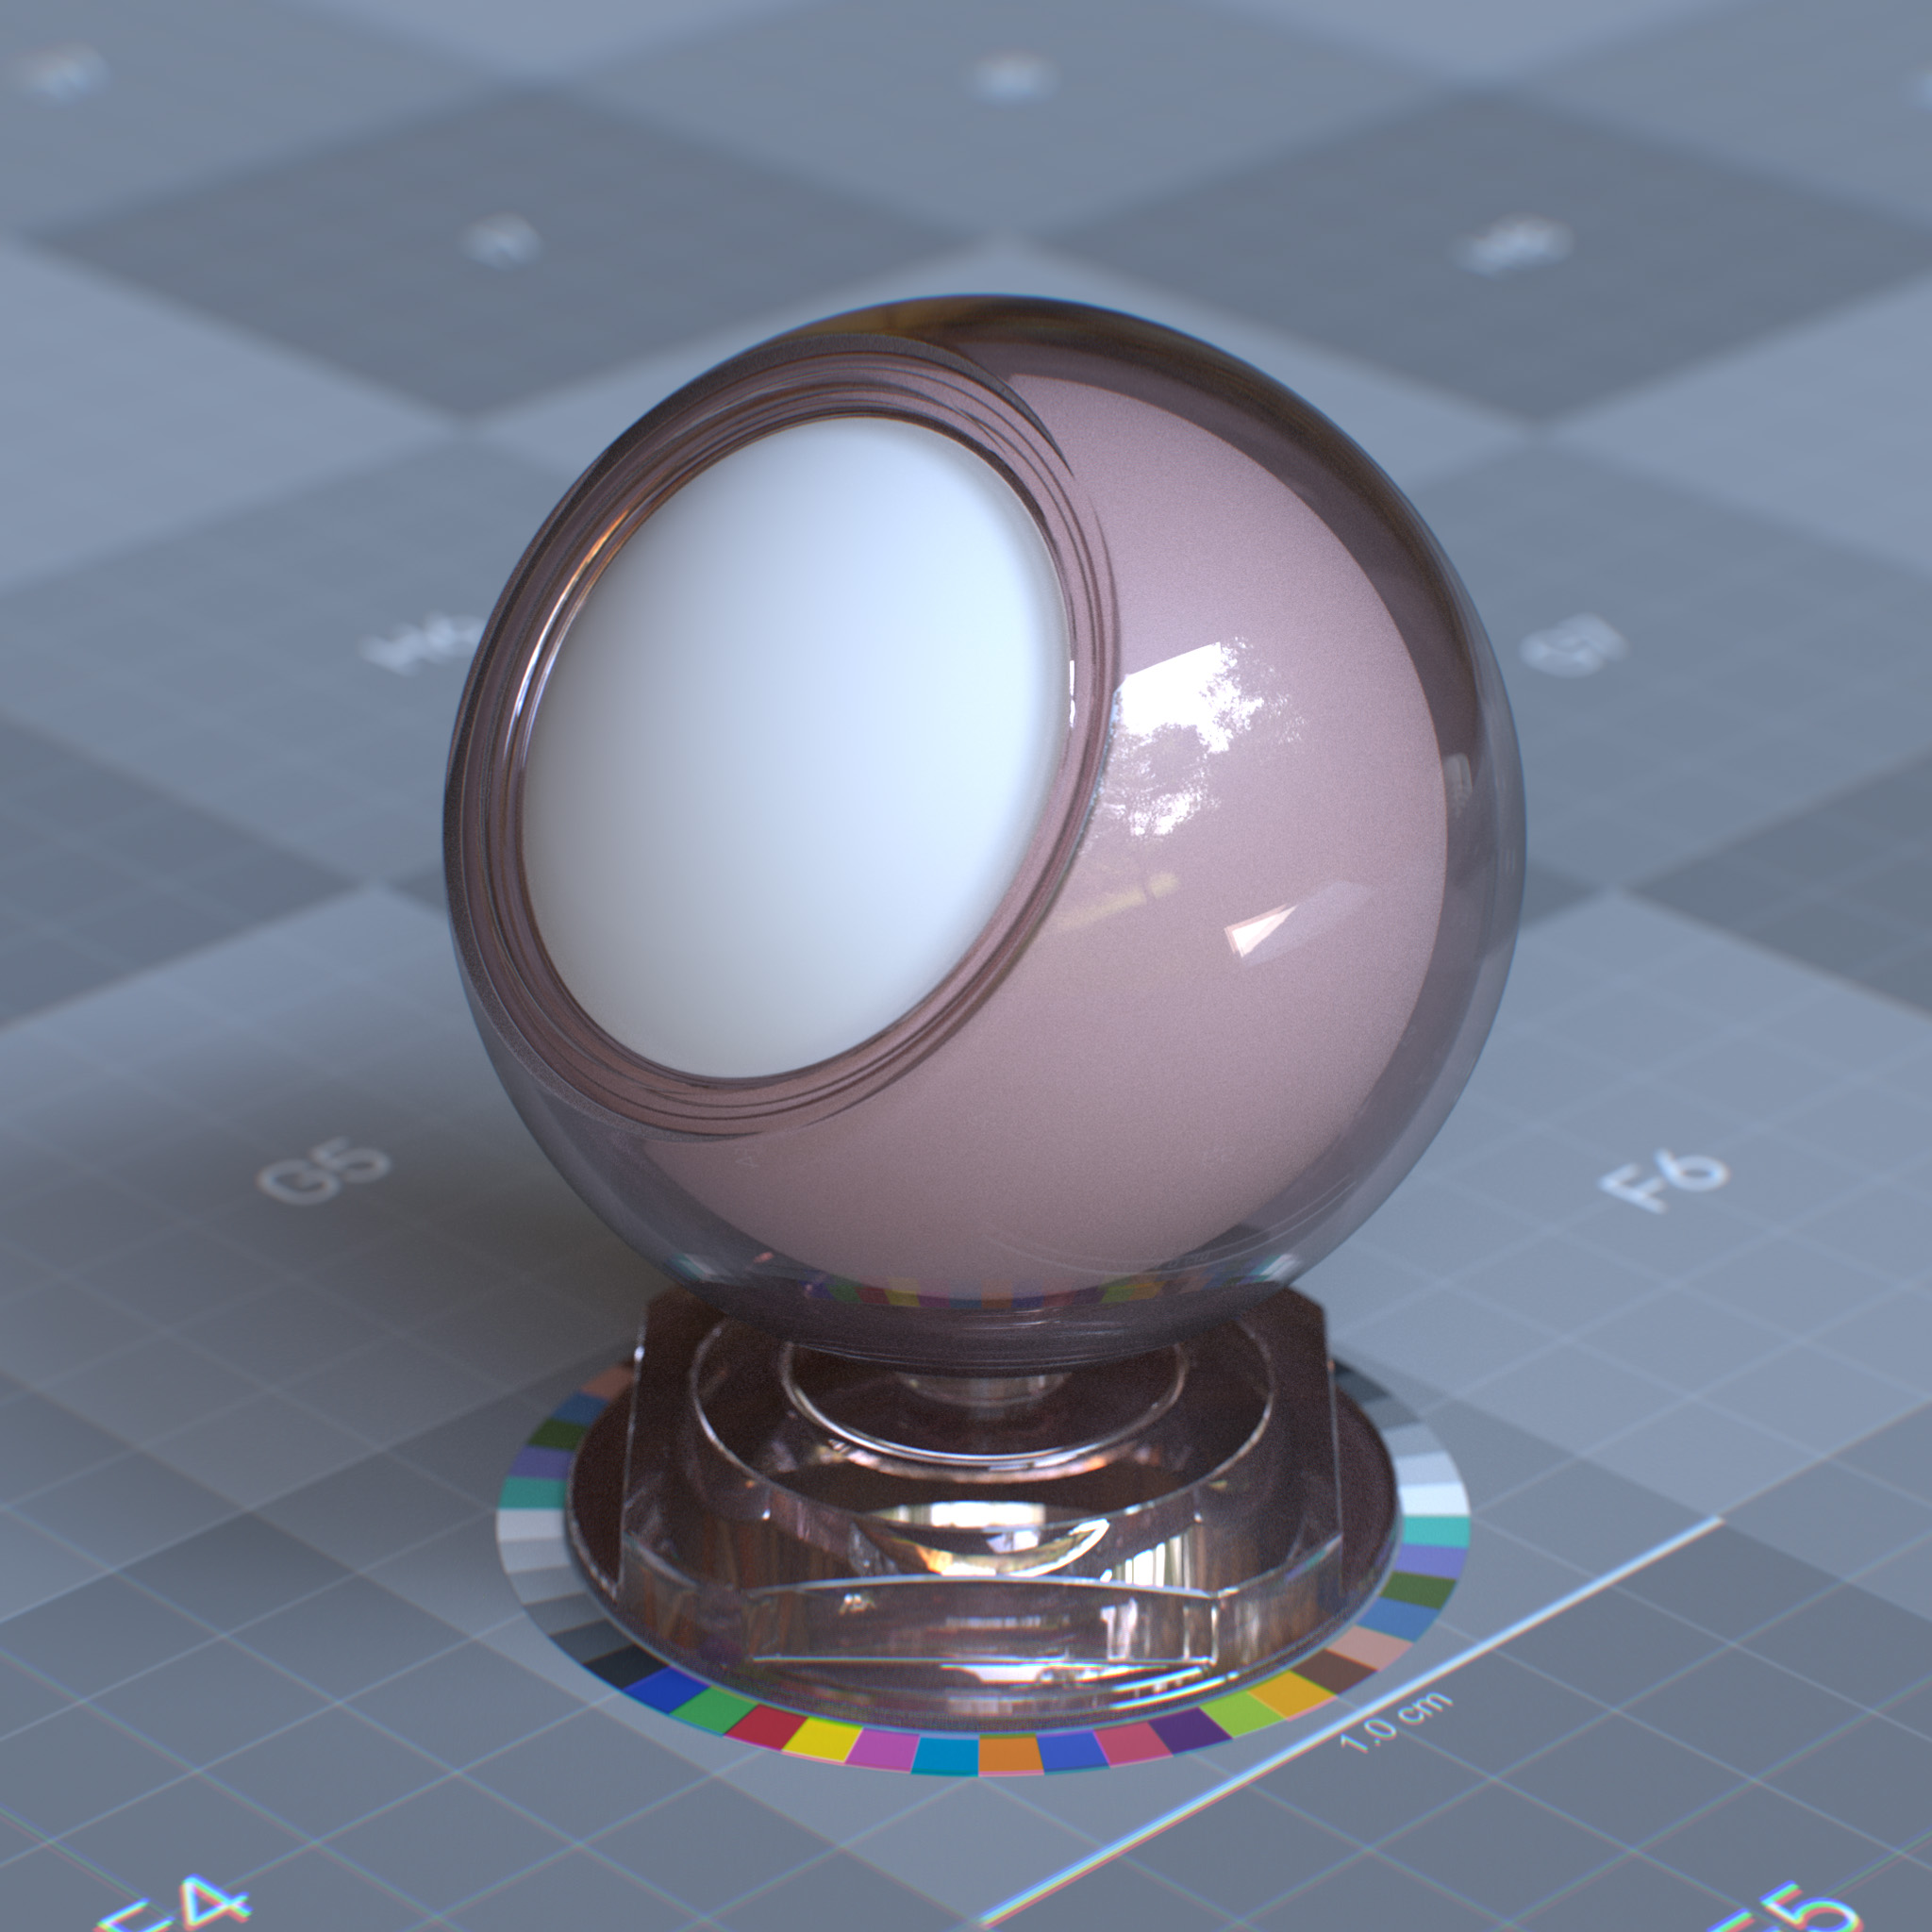 rtx_material_omnisurfacebase_coat_affect_roughness_specular_transmission_base